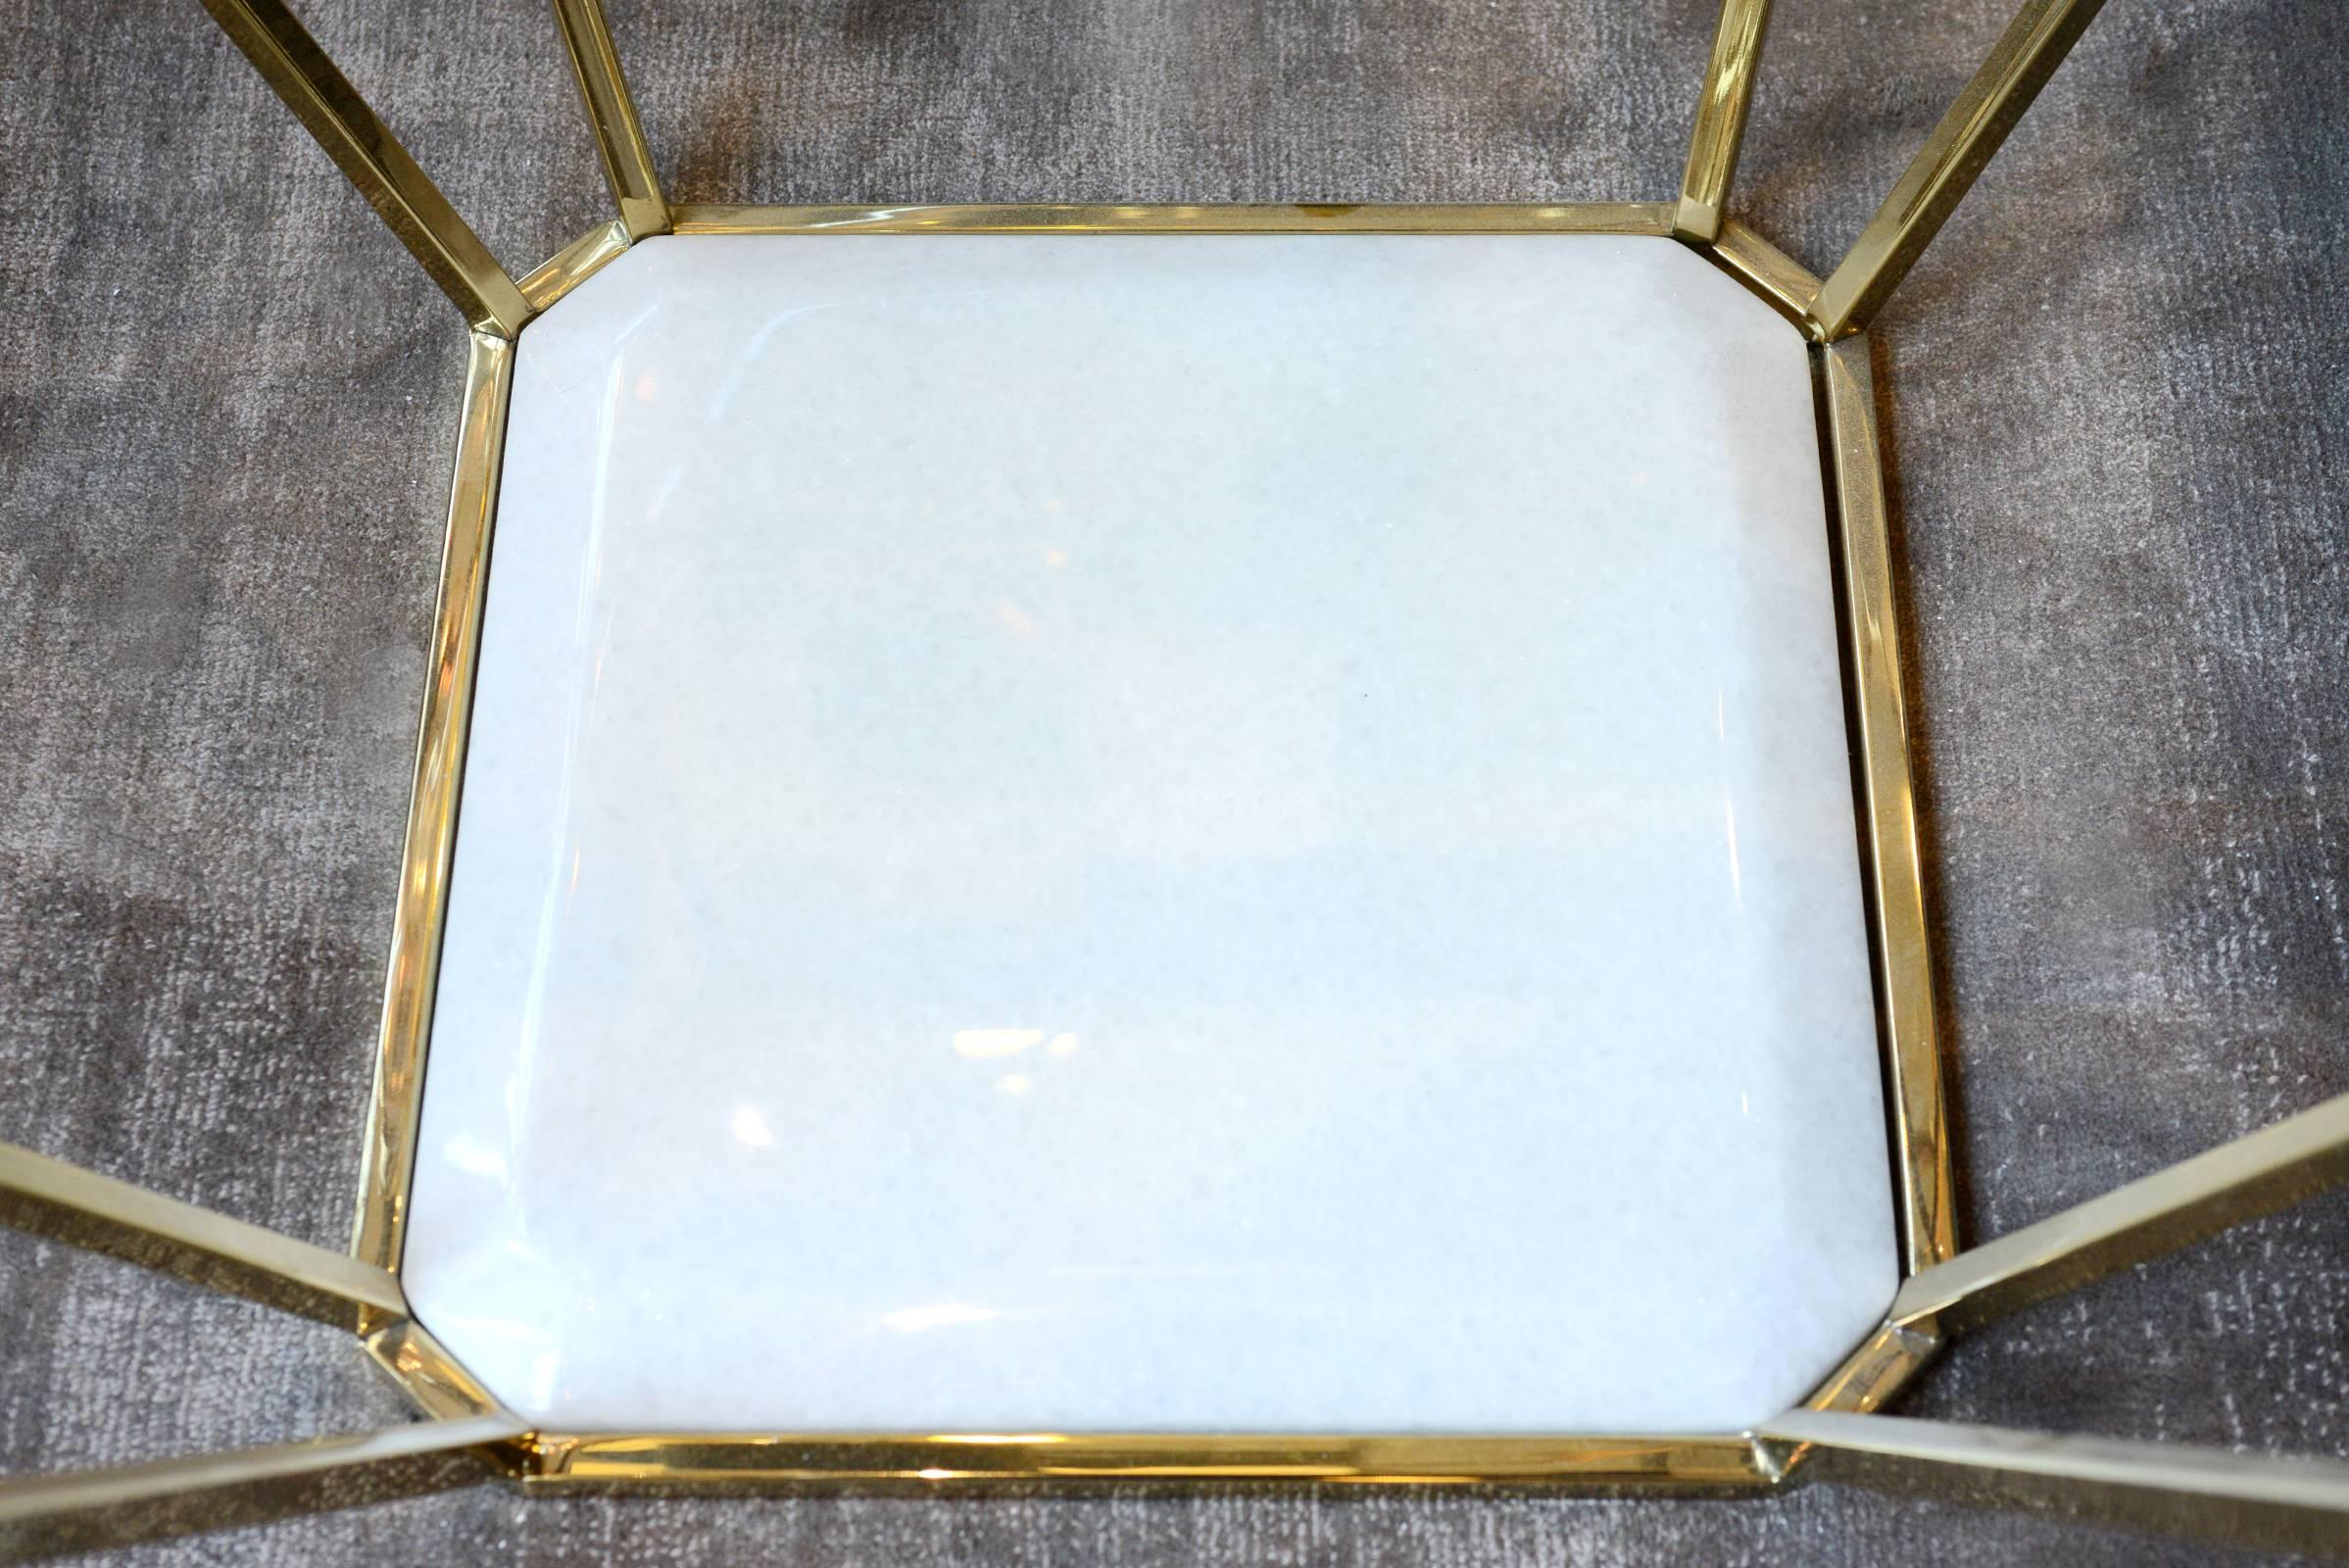 Indian Diamond Side Table in Gold Finish with Tempered Clear Glass Top and Marble Base